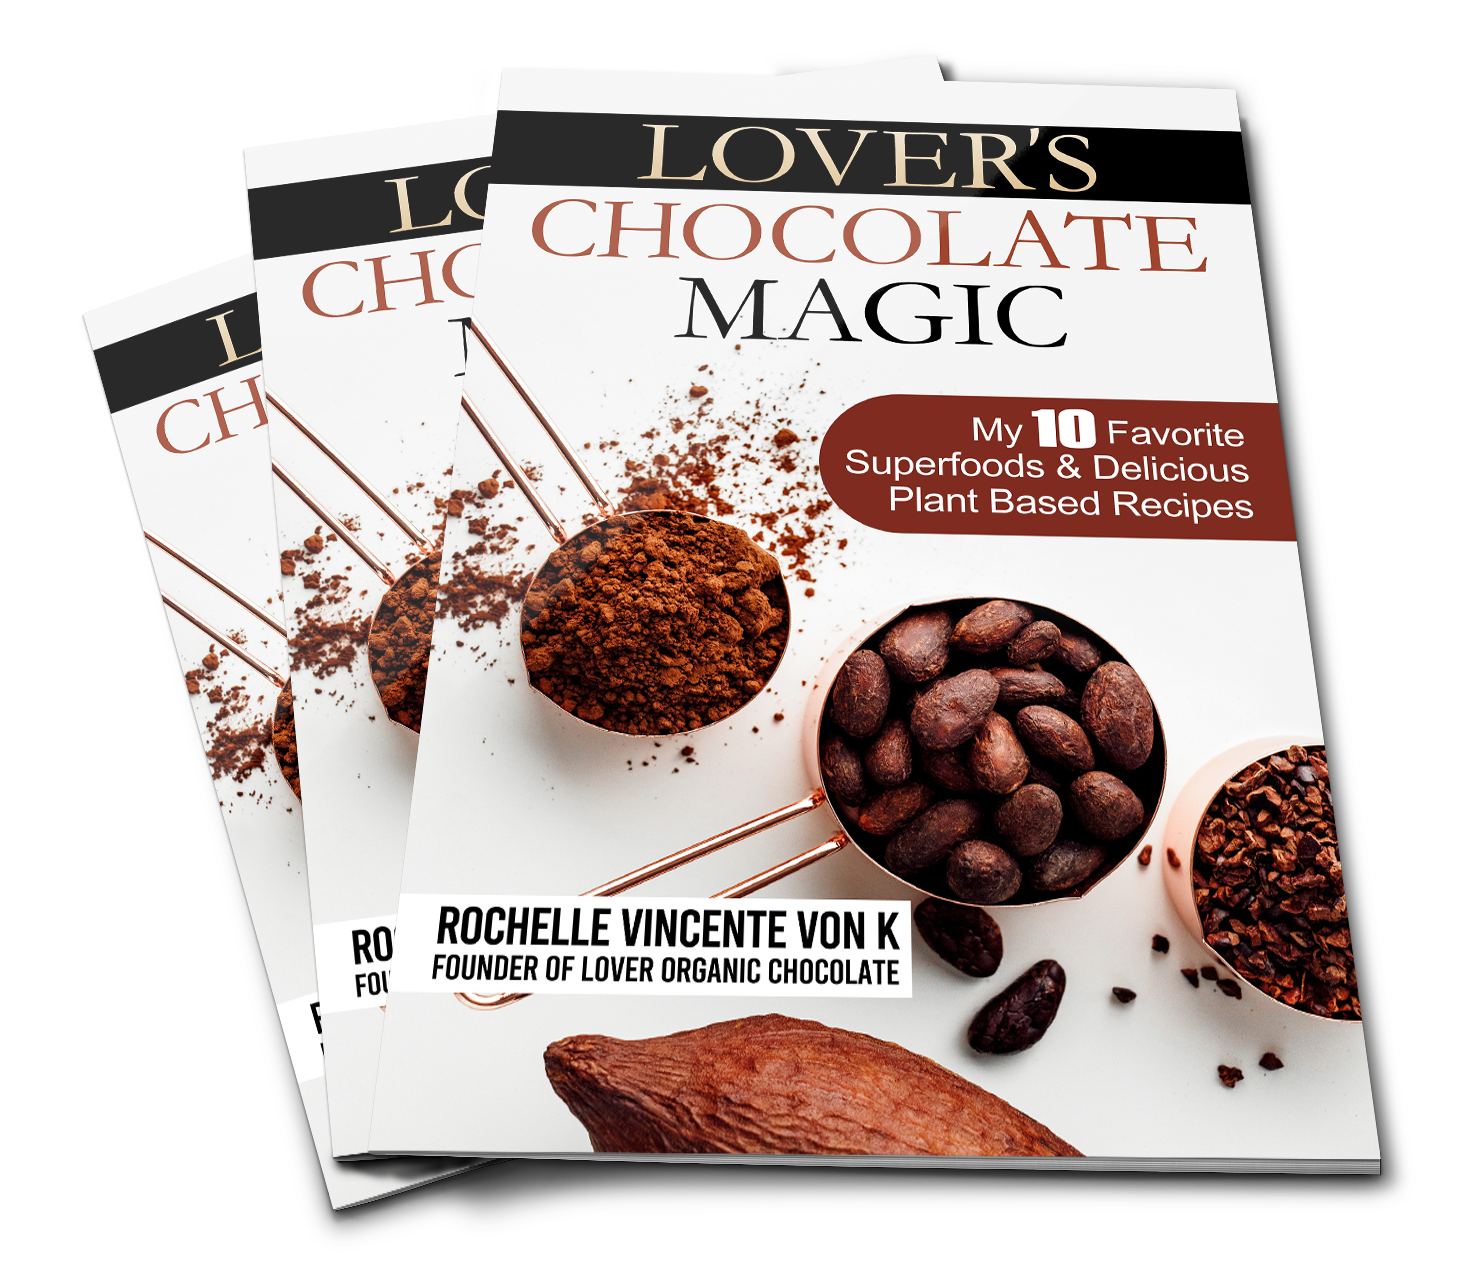 Lover's Chocolate Magic: My 10 Favorite Superfoods & Delicious Plant Based Recipes